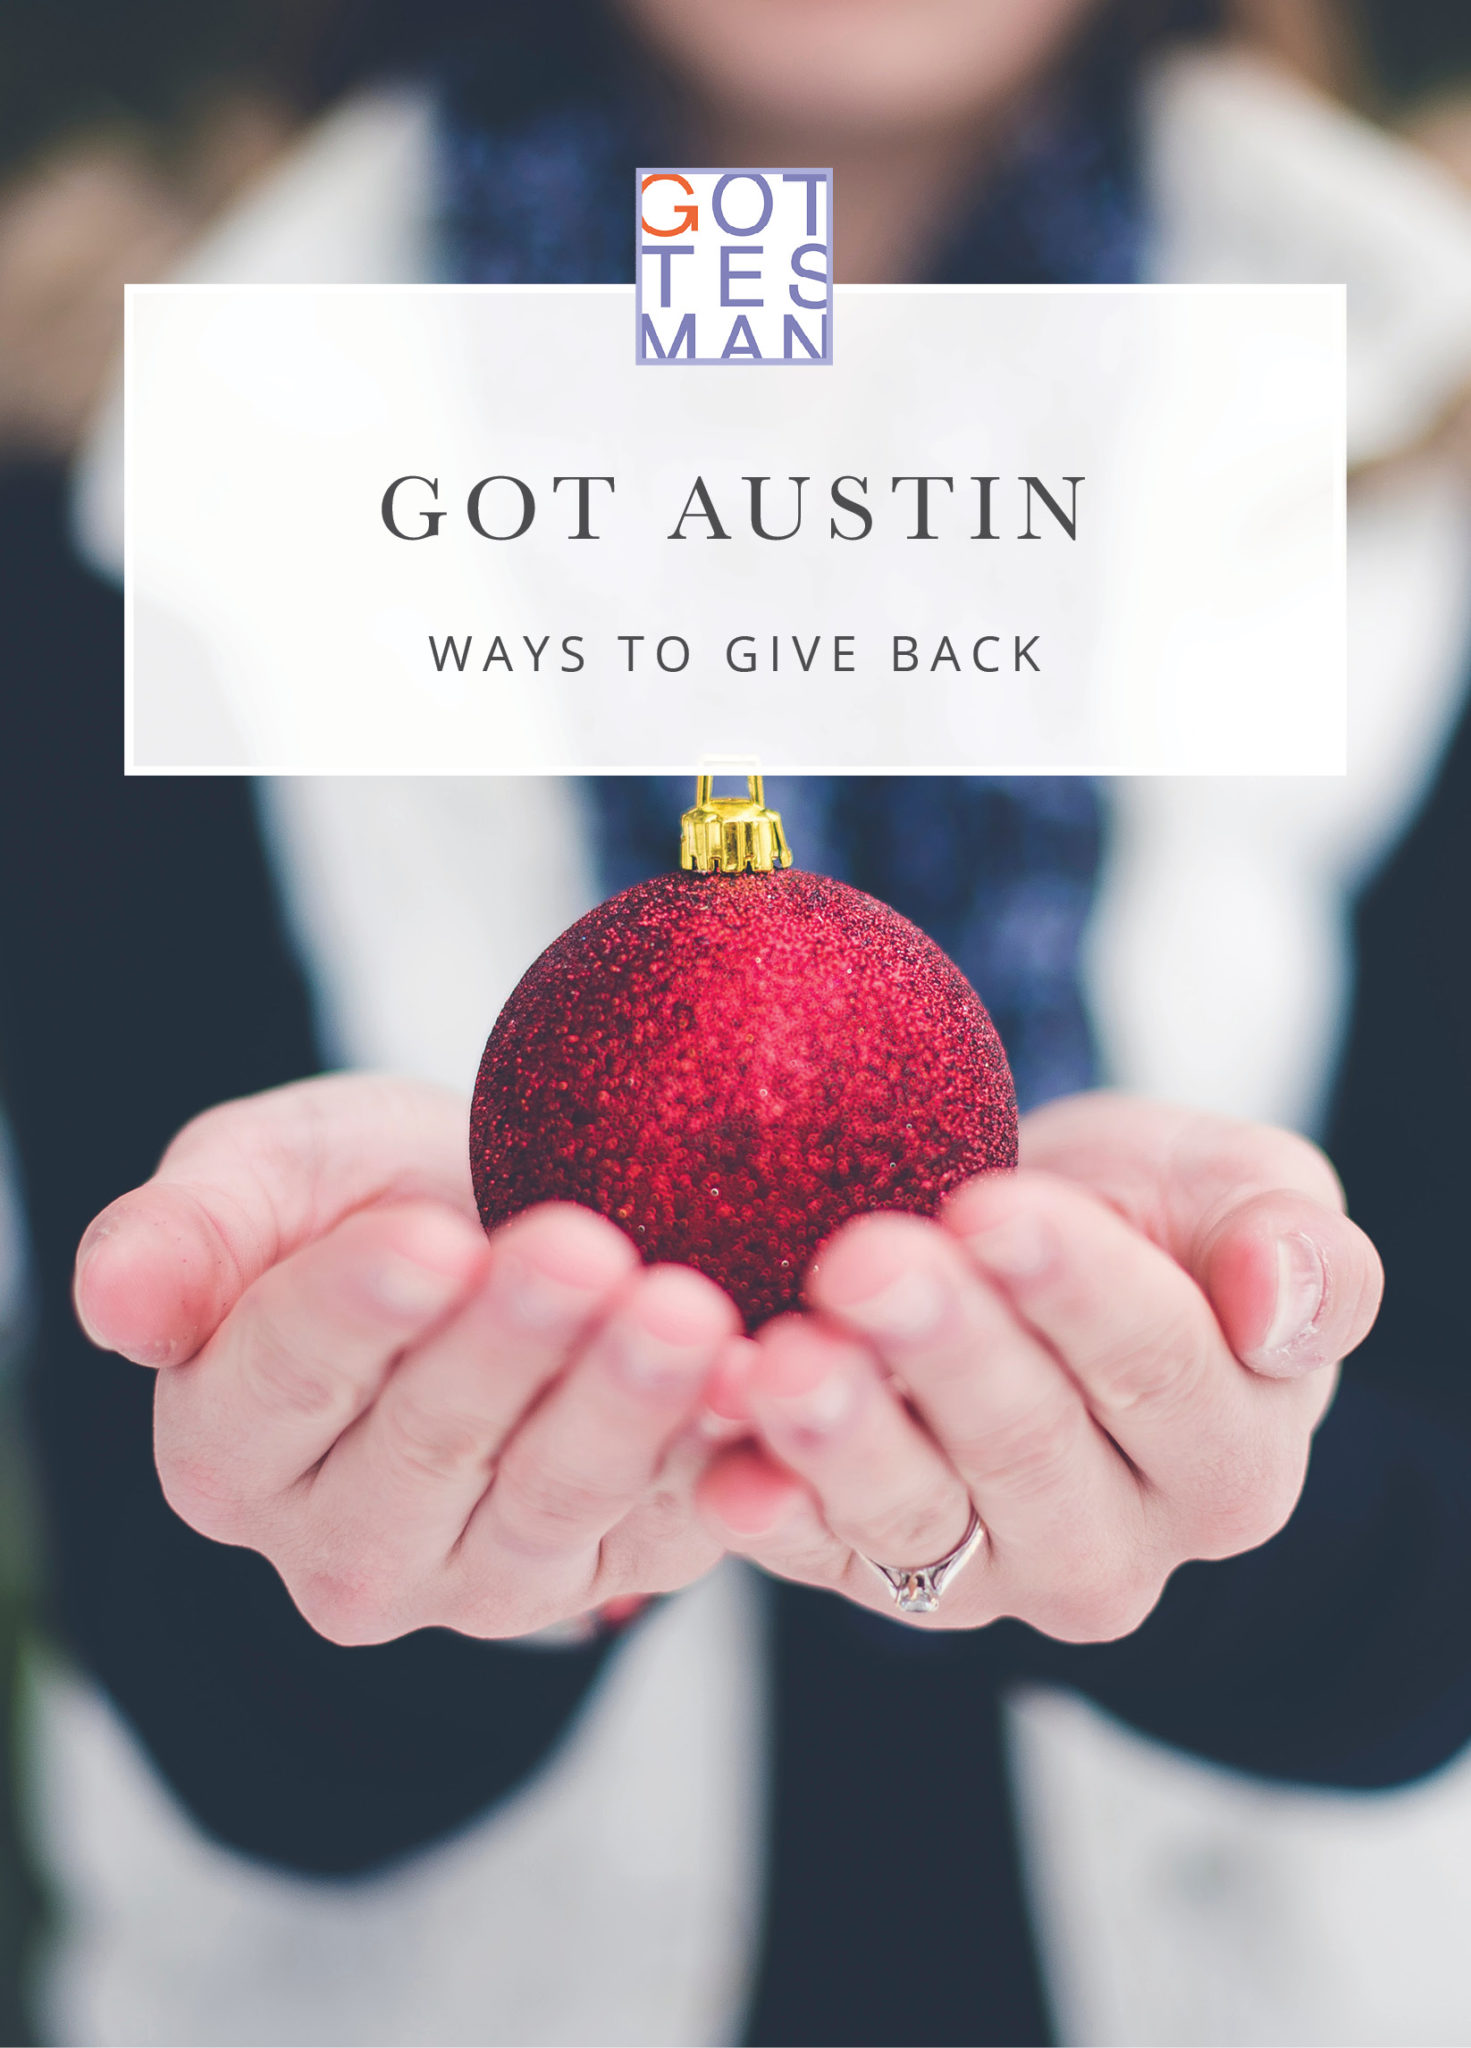 Up close hands holding an ornament with text overlay, "Got Austin: Ways to Give Back"